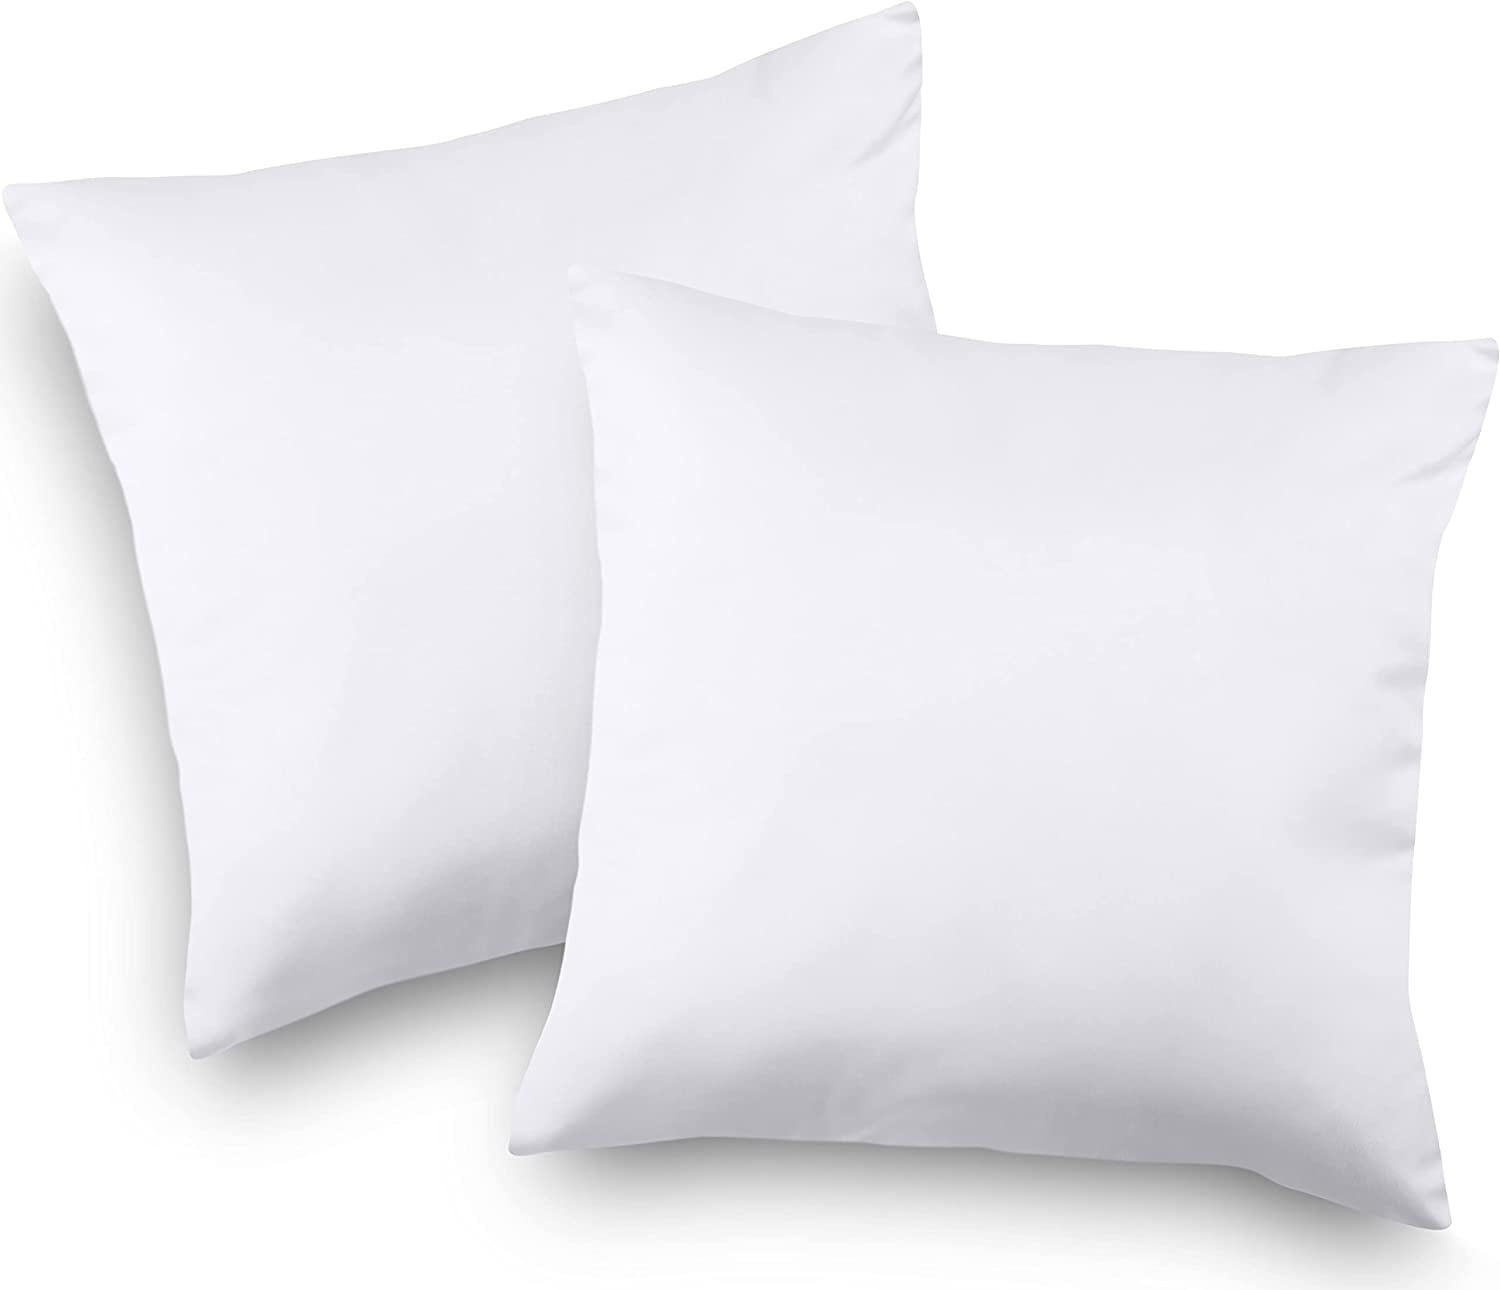 Utopia Bedding Throw Pillows Insert Pack of 2, White - 20x20 Inches